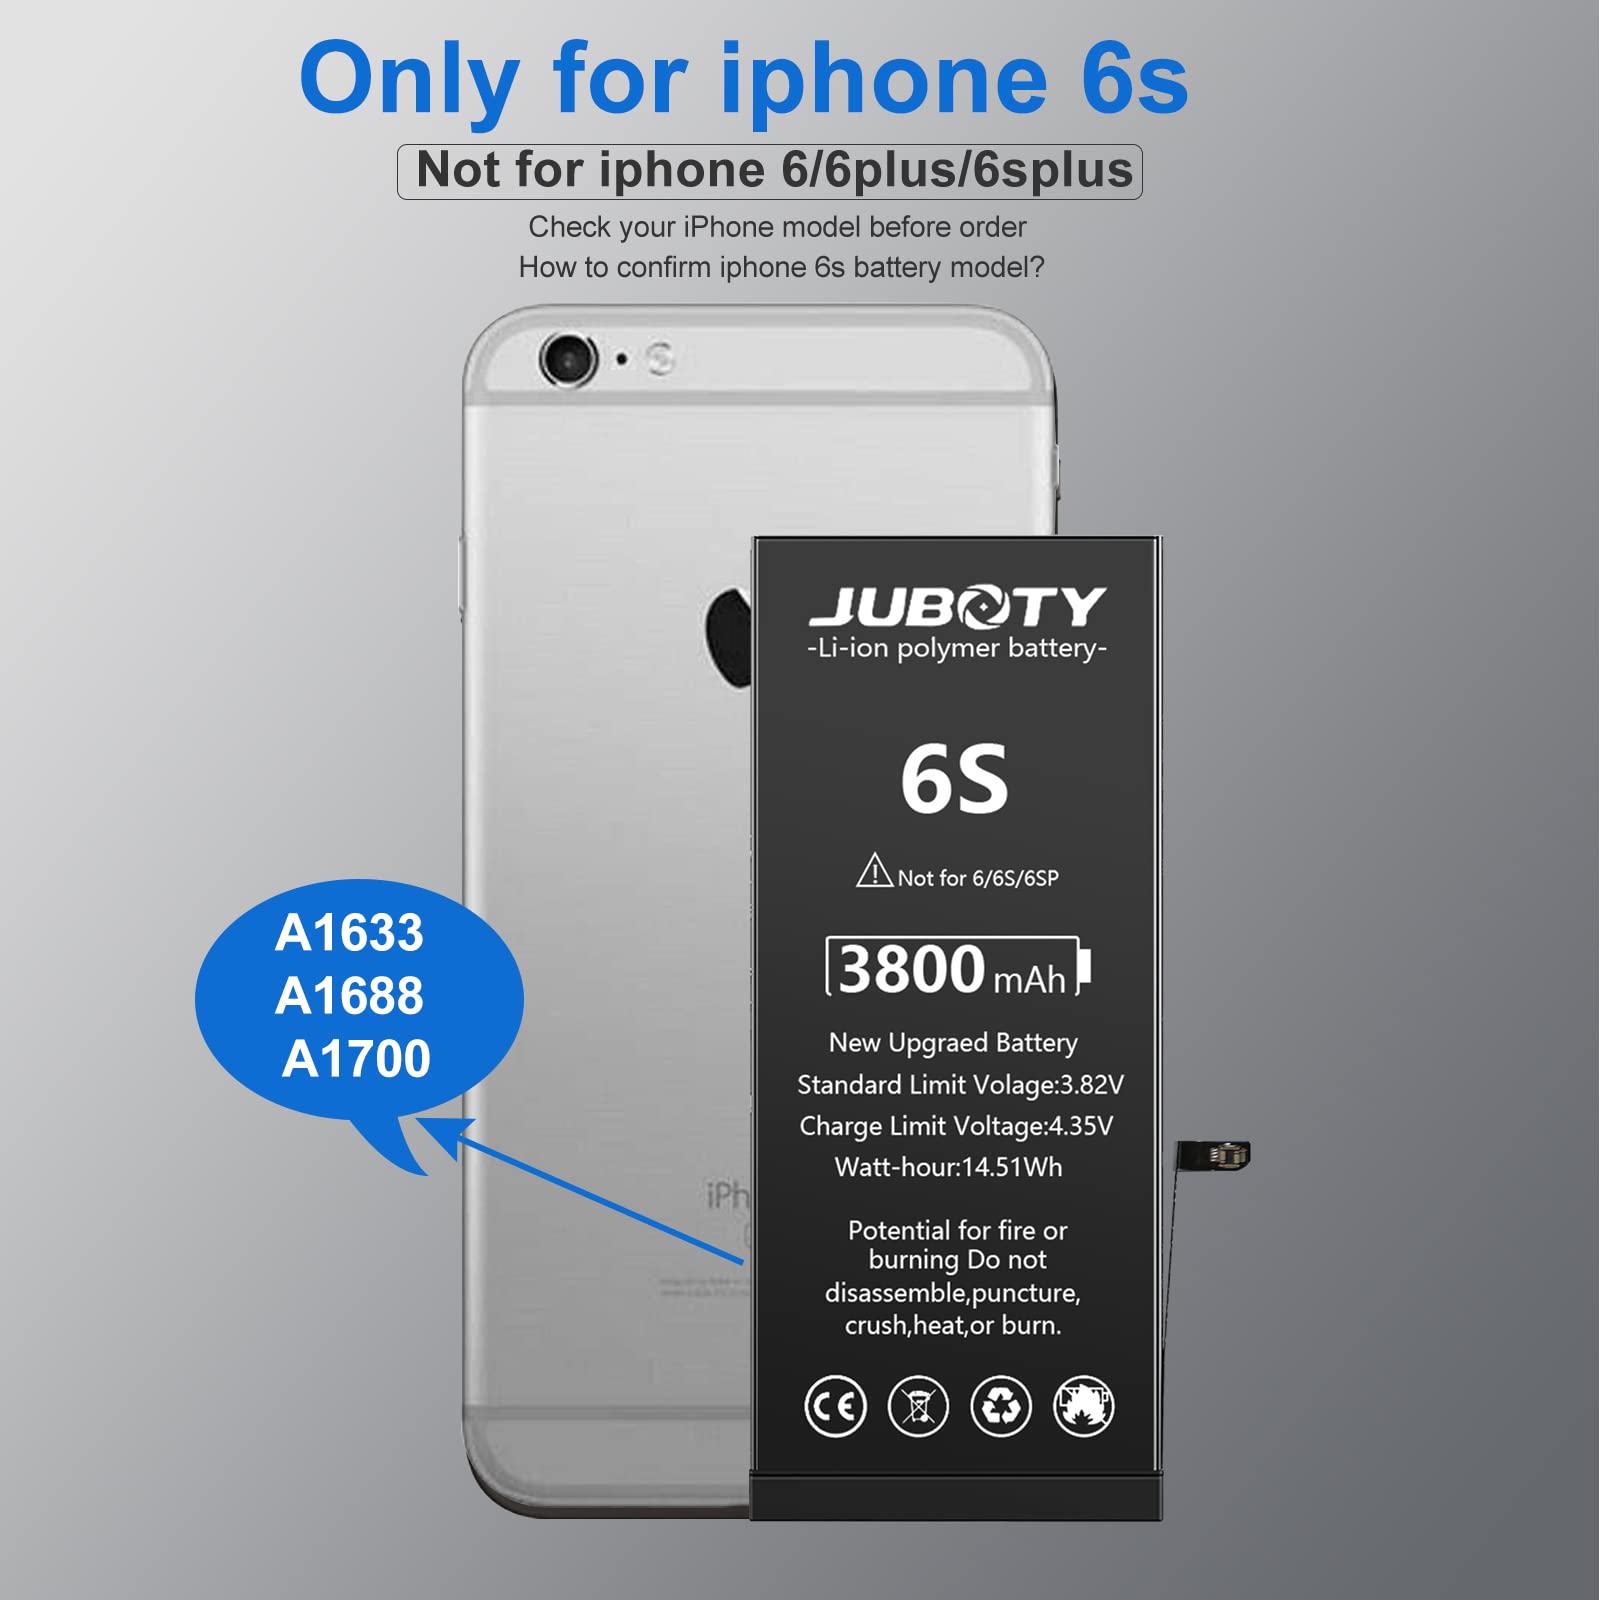 JUBOTY Battery for iPhone 6s 3800mAh, Li-ion New 0 Cycle Internal New Upgrade High Capacity Battery Replacement for iPhone 6S Model A1633 A1688 A1700 with Professional Repair Tool Kit